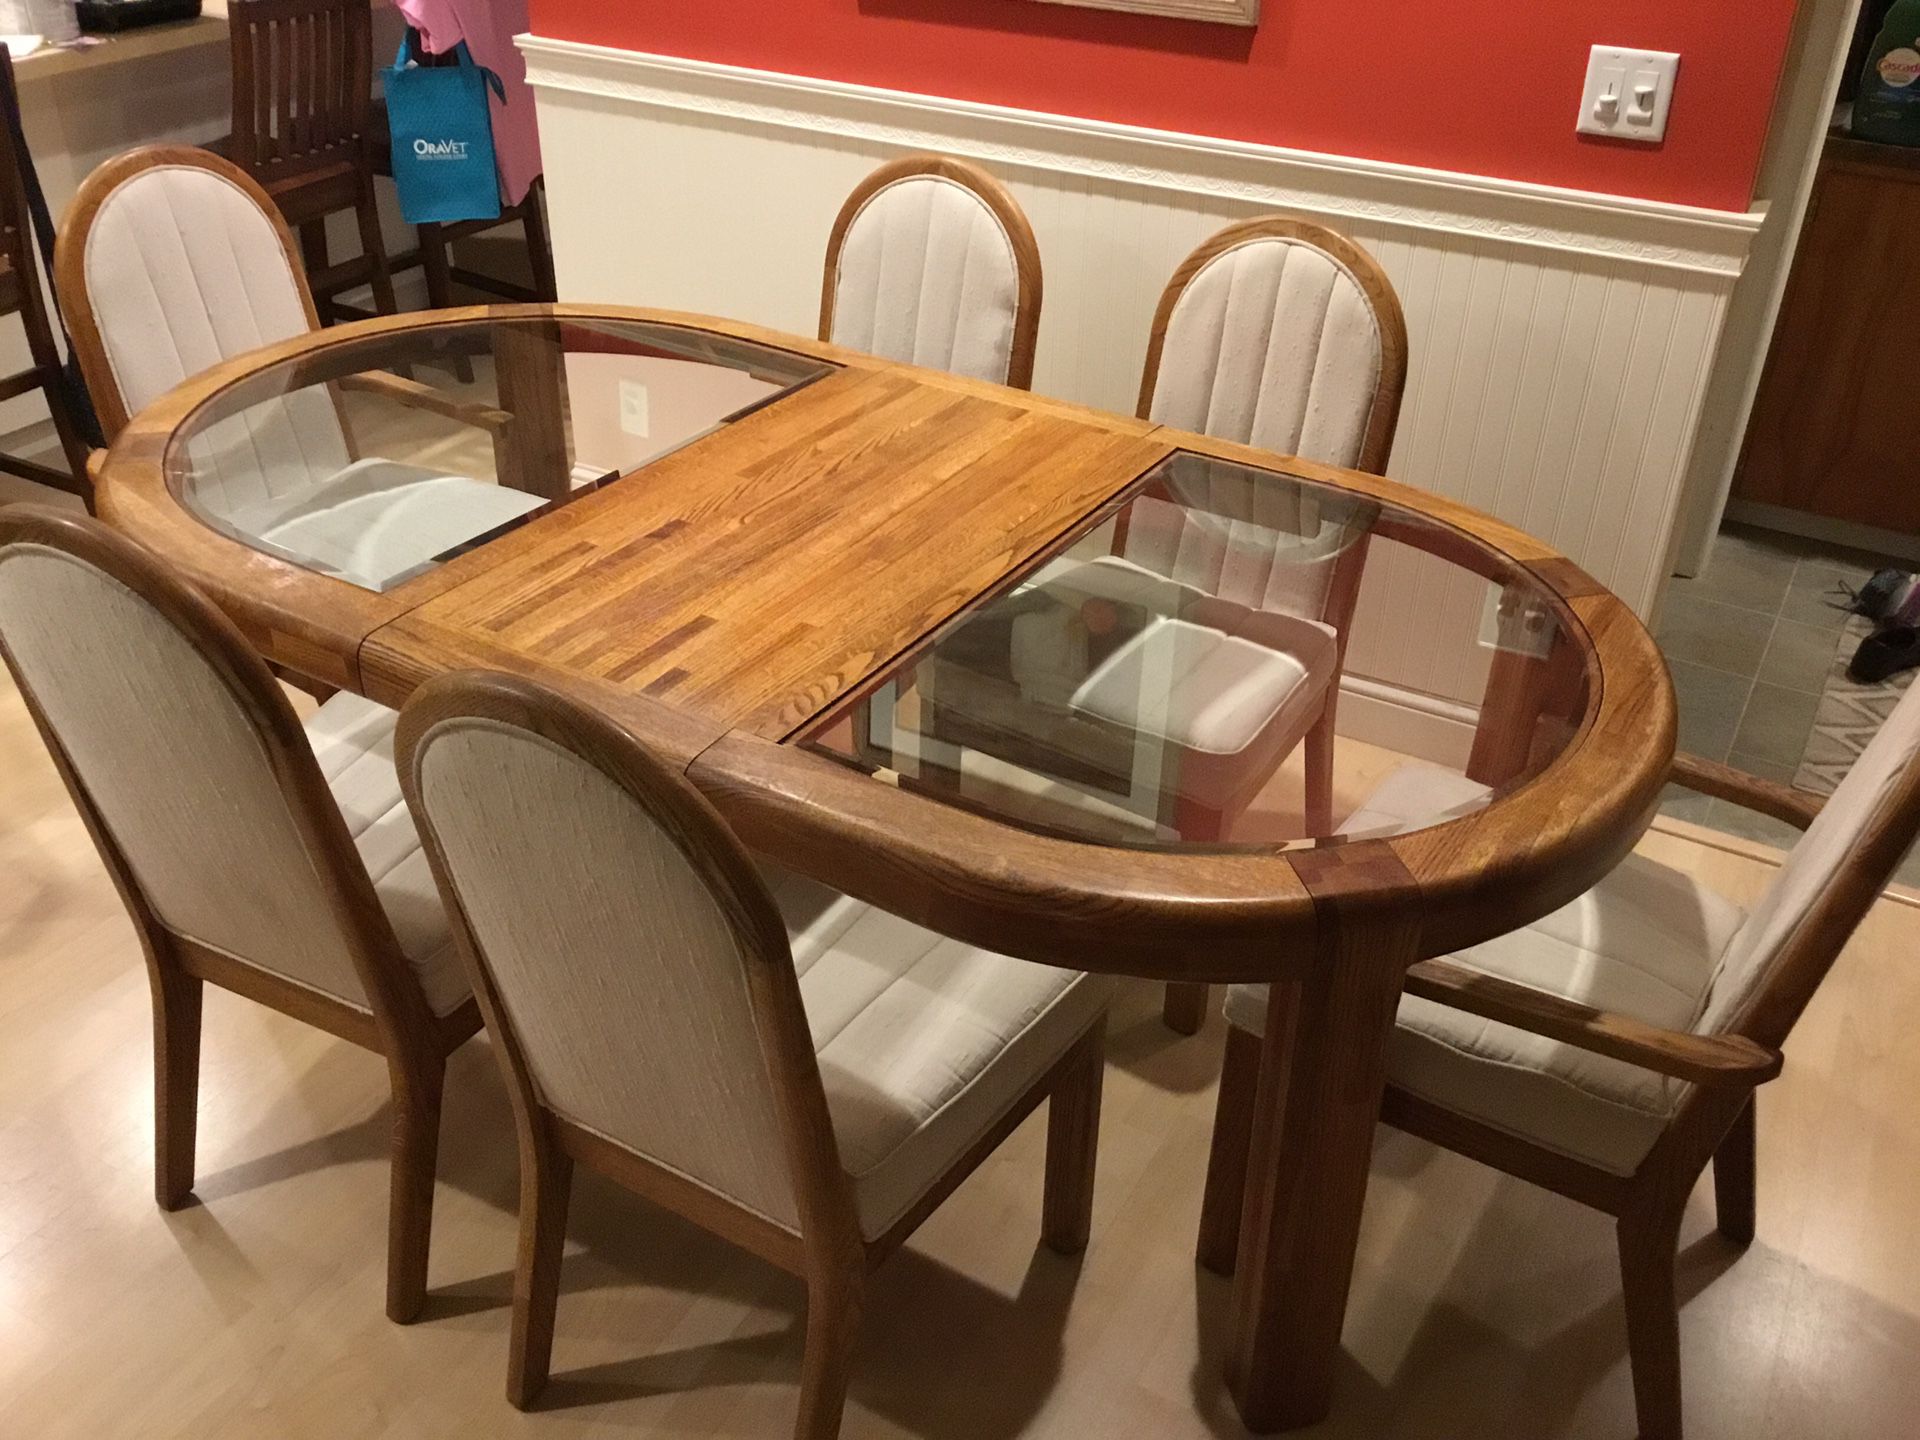 Oak and glass dining table with six (6) chairs and leaf